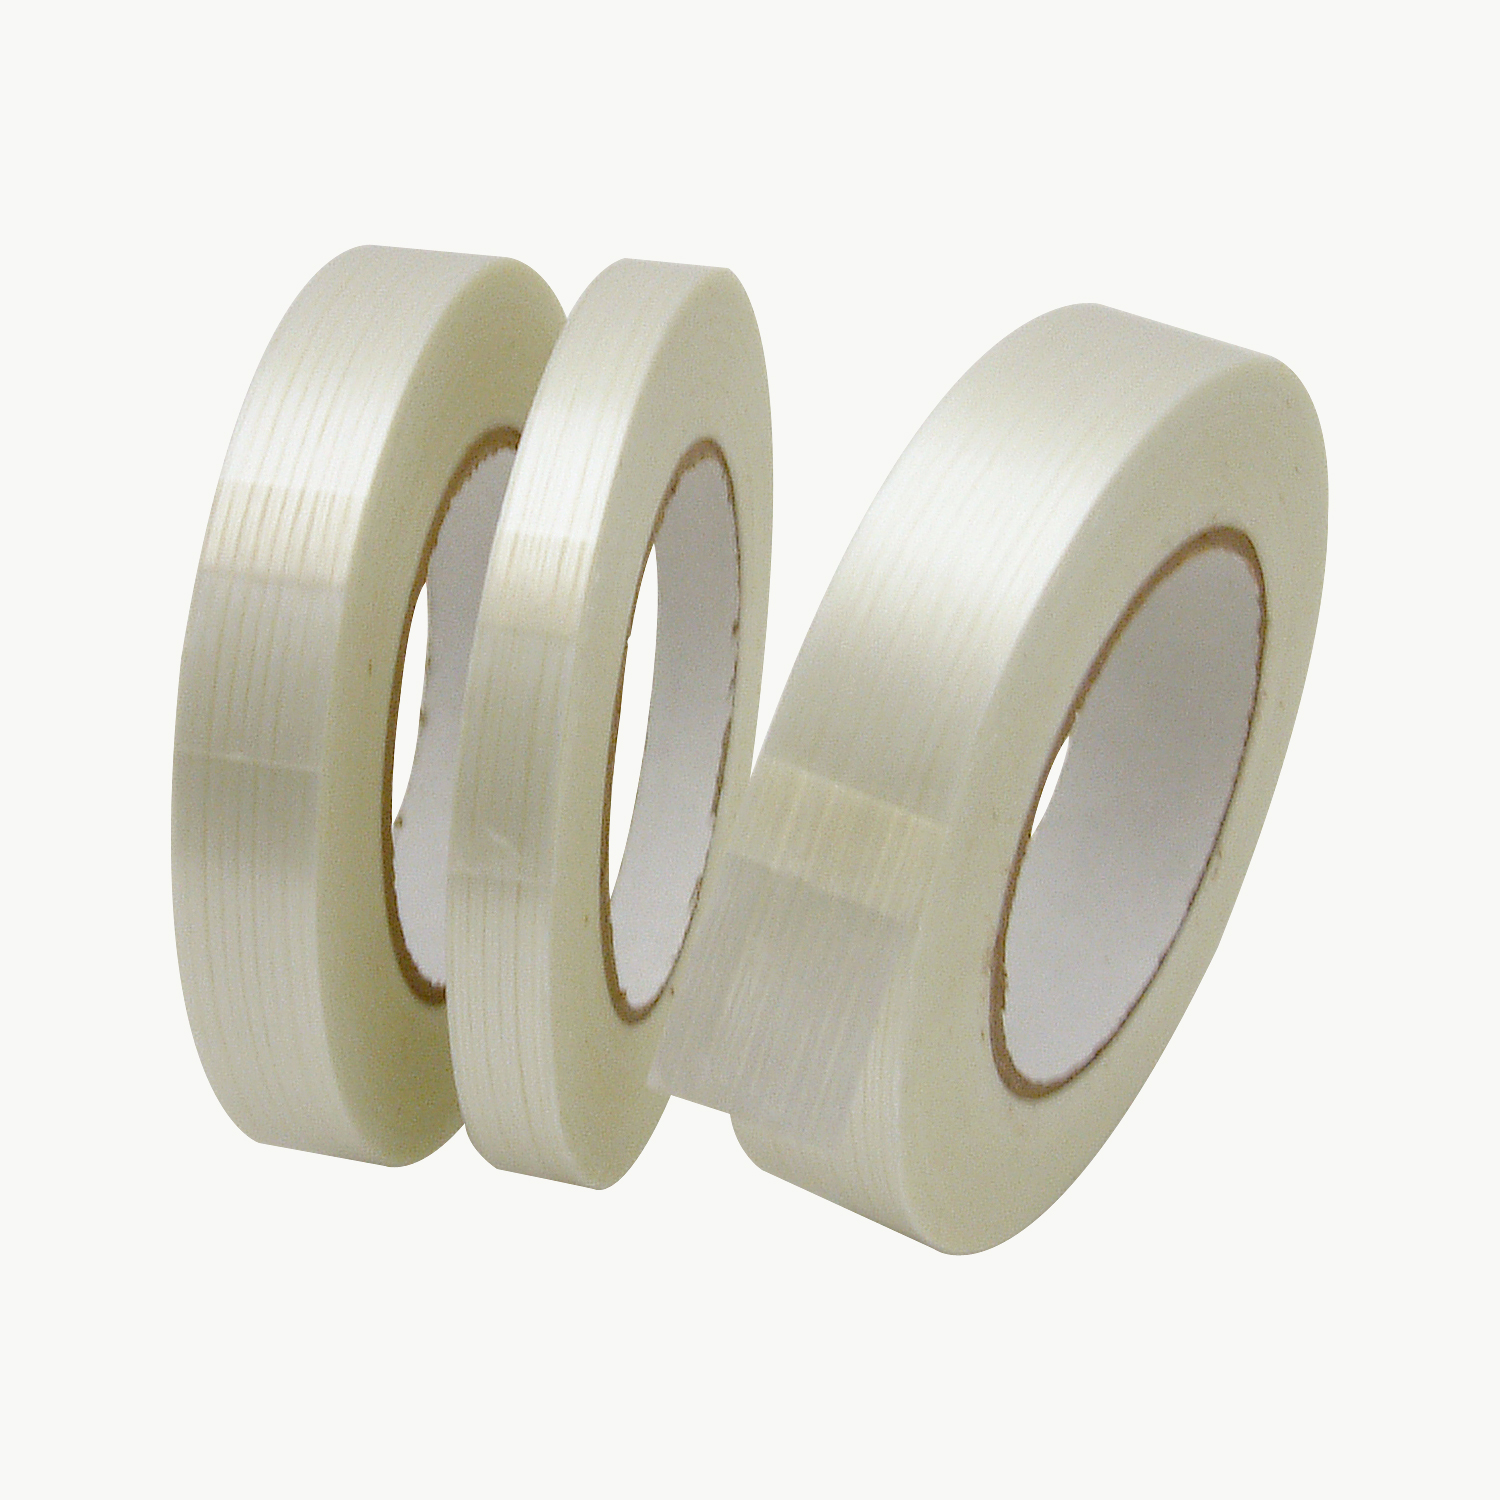 JVCC 761 Industrial Grade Filament Strapping Tape